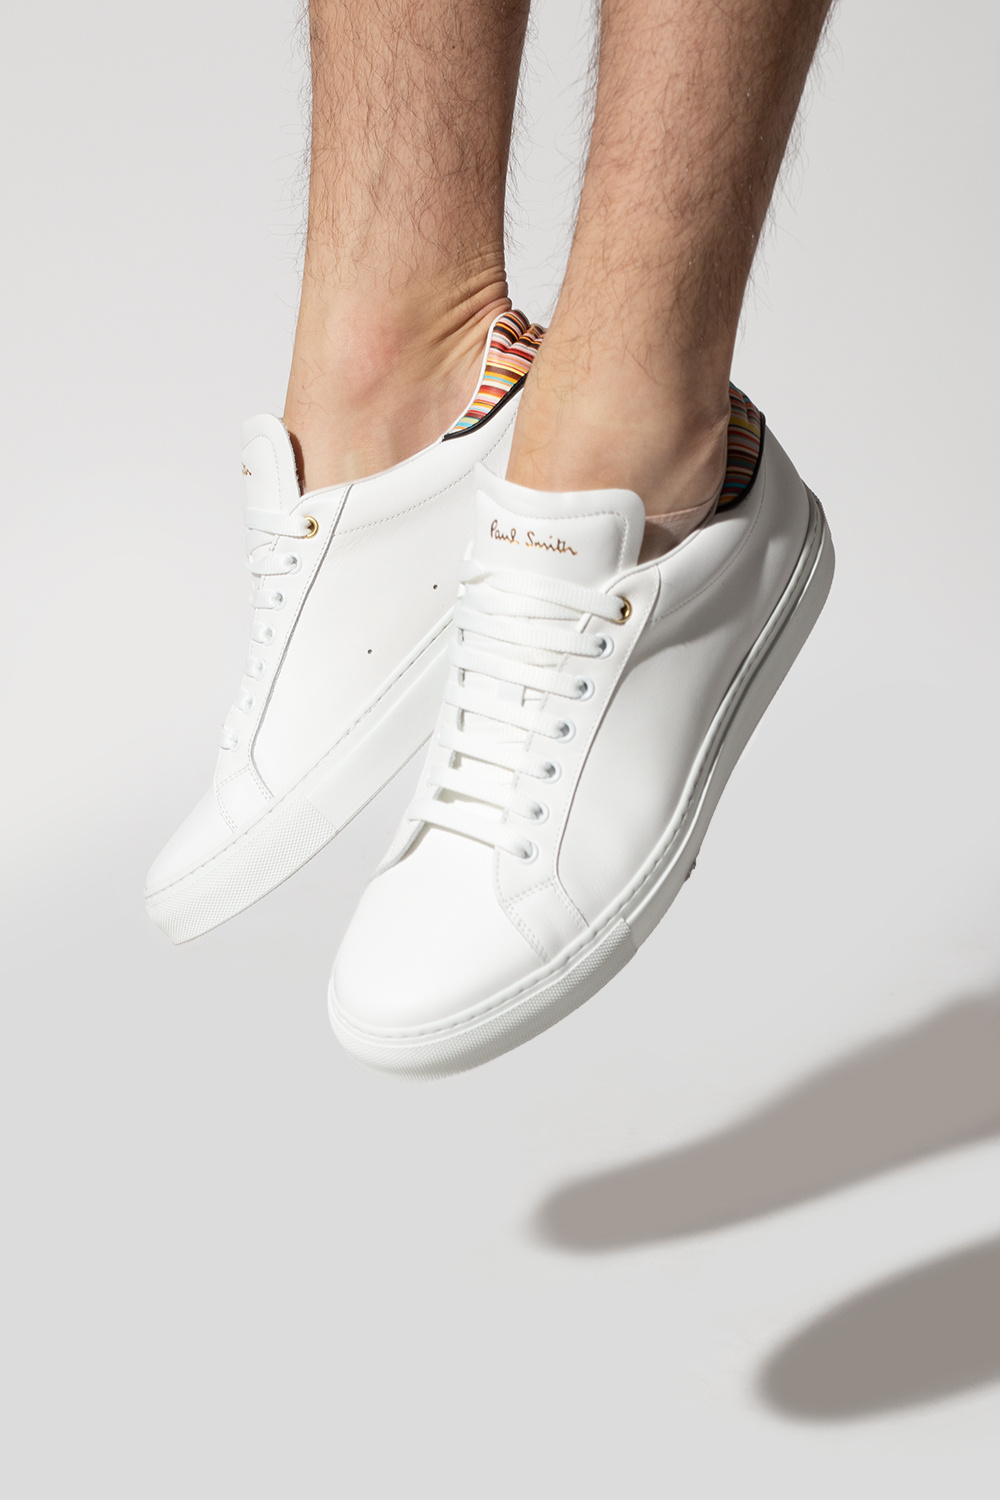 Paul Smith Sneakers with logo | Men's Shoes | IetpShops